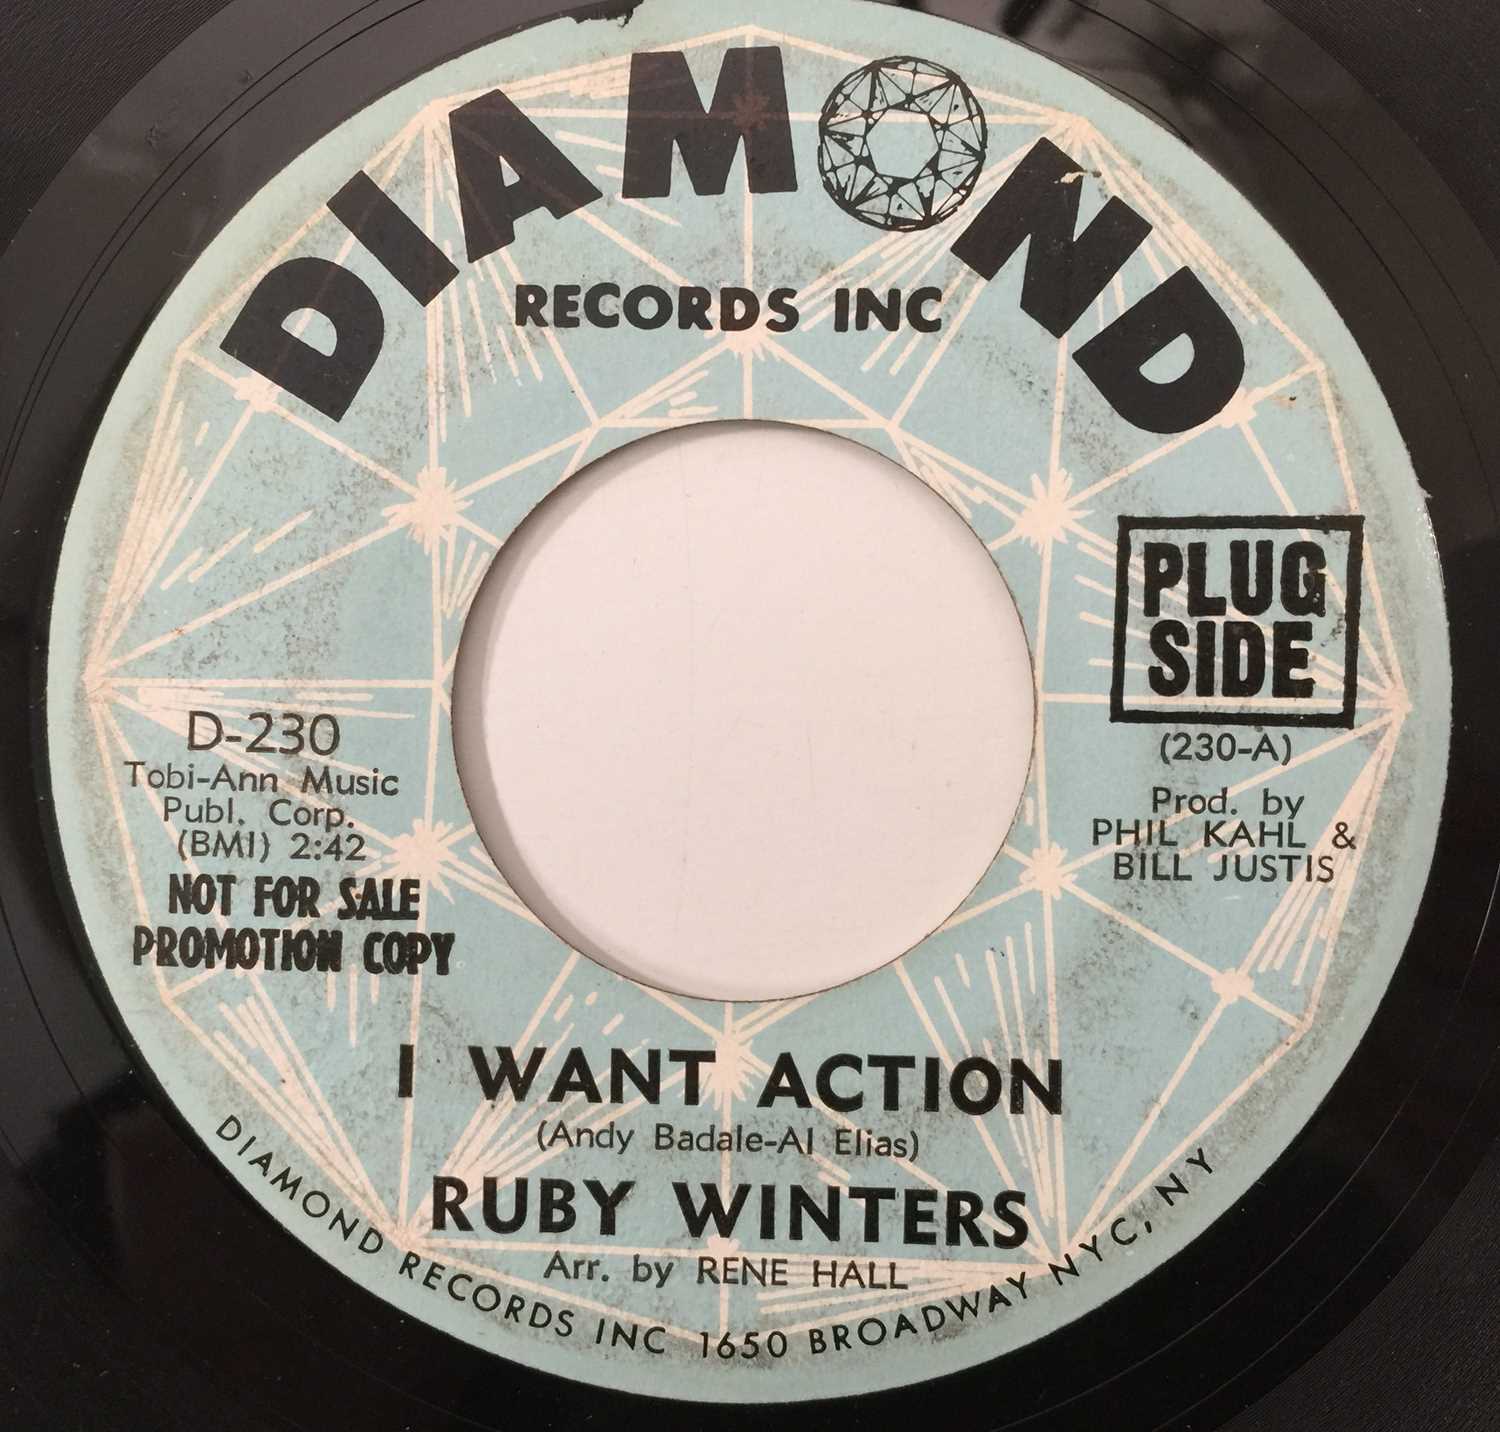 RUBY WINTERS - I WANT ACTION/ BETTER 7" (US PROMO - DIAMOND D-230)